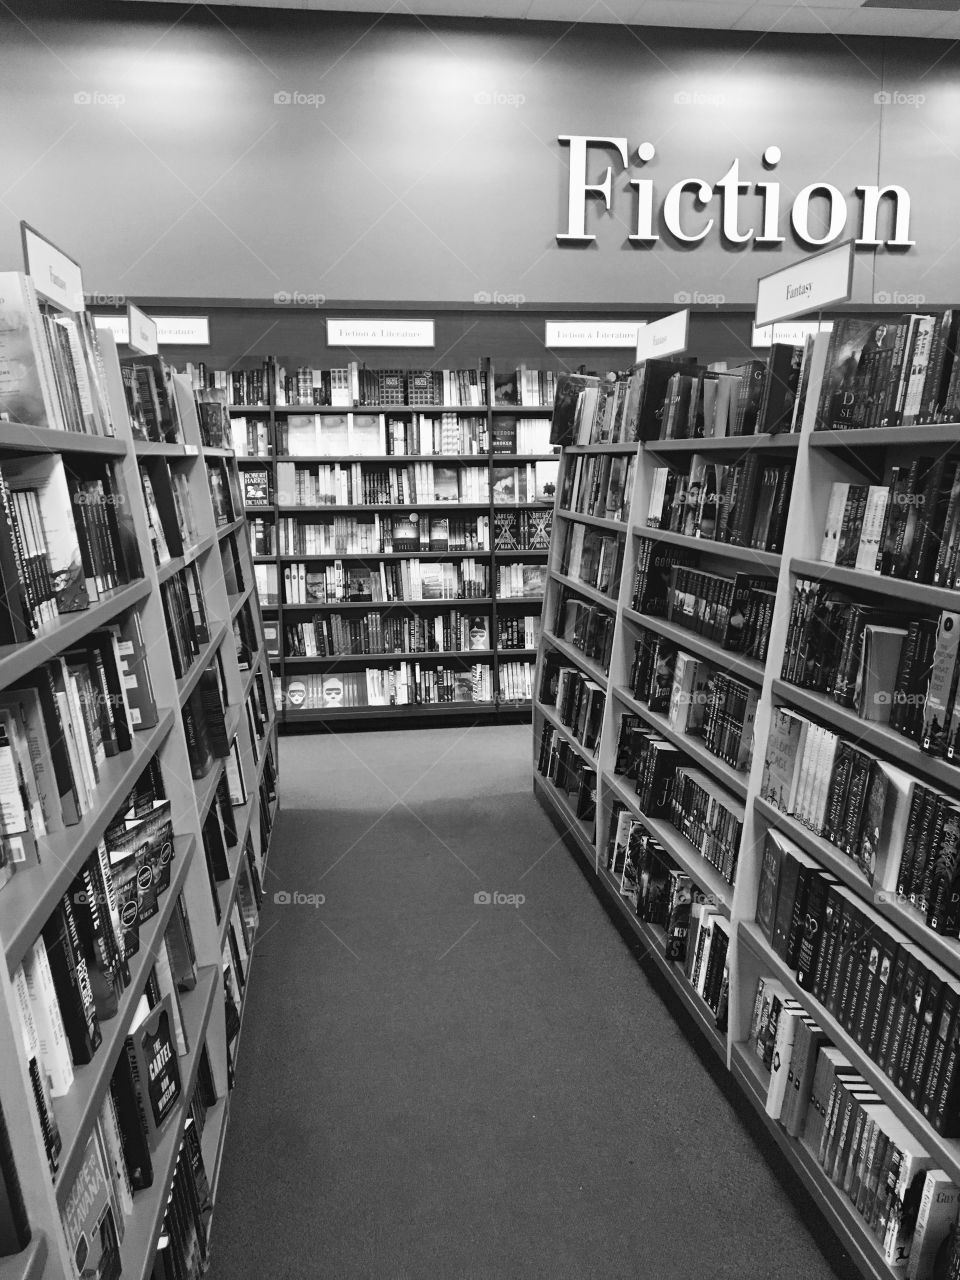 Chapters Indigo, fiction section